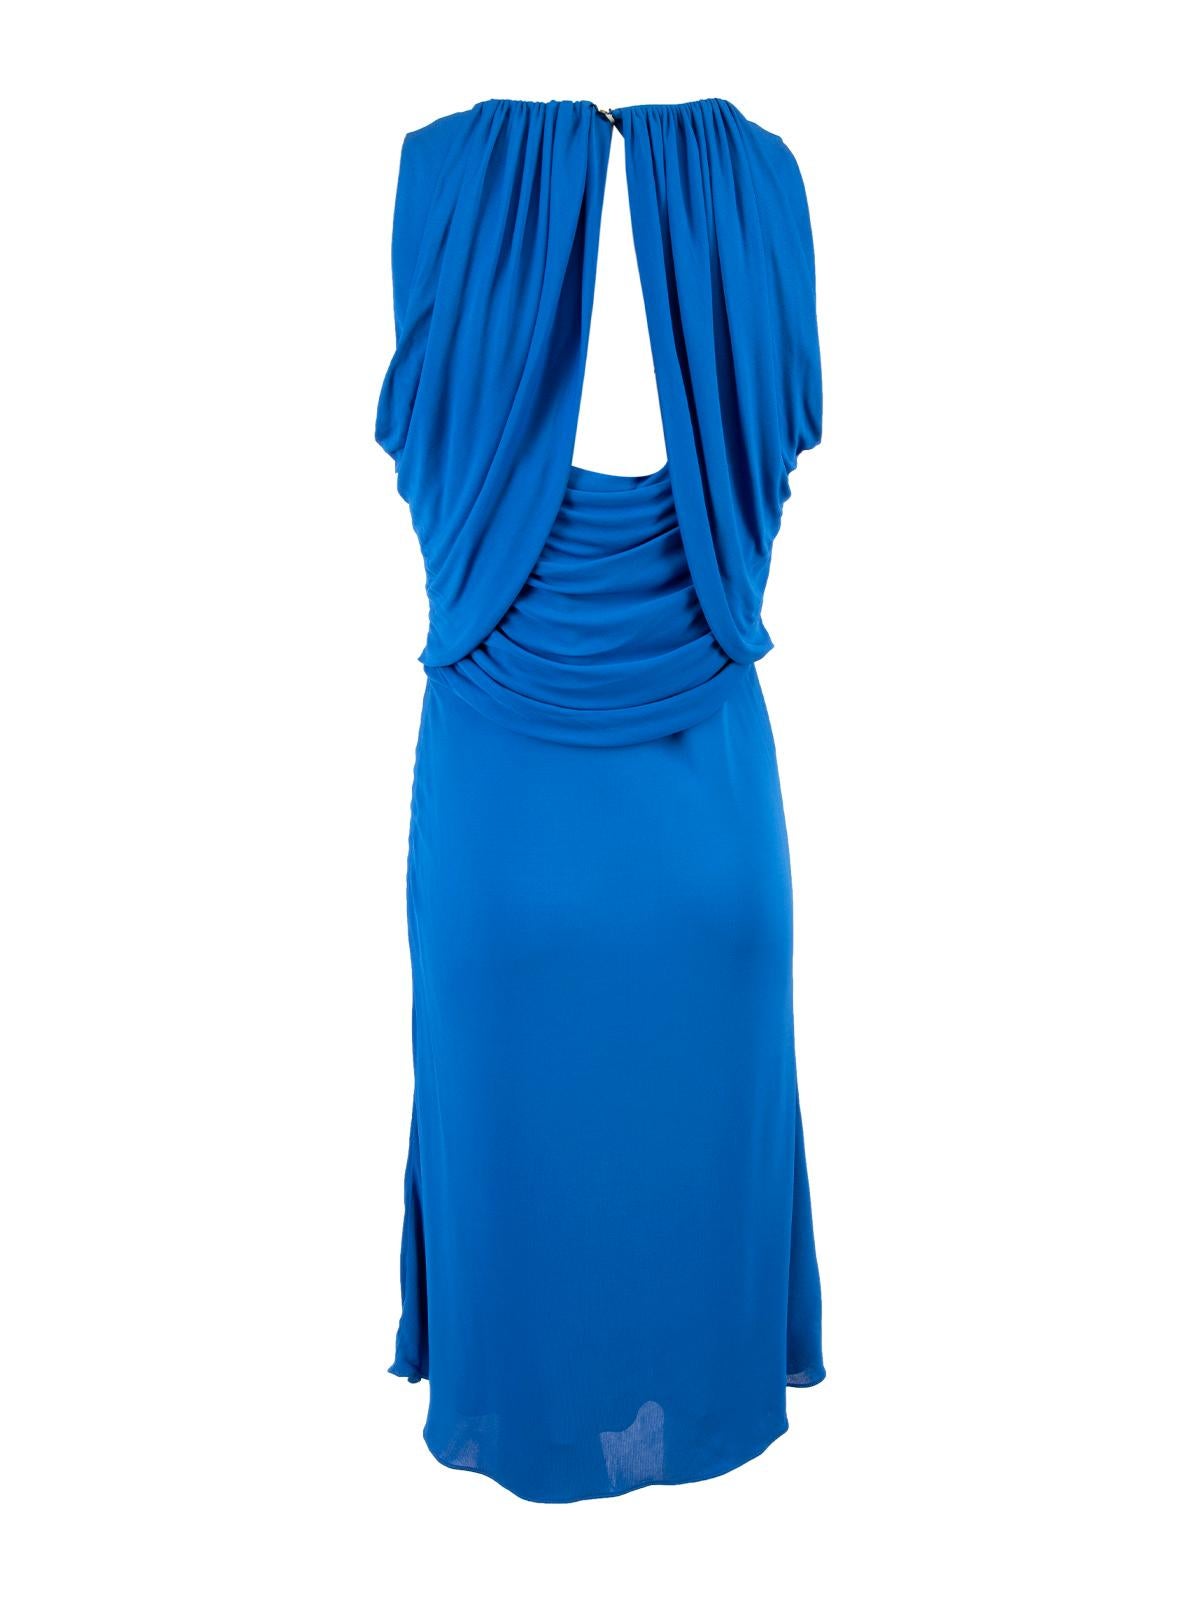 Pre-Loved Versace Women's Sleeveless Knee Length Dress In Excellent Condition For Sale In London, GB